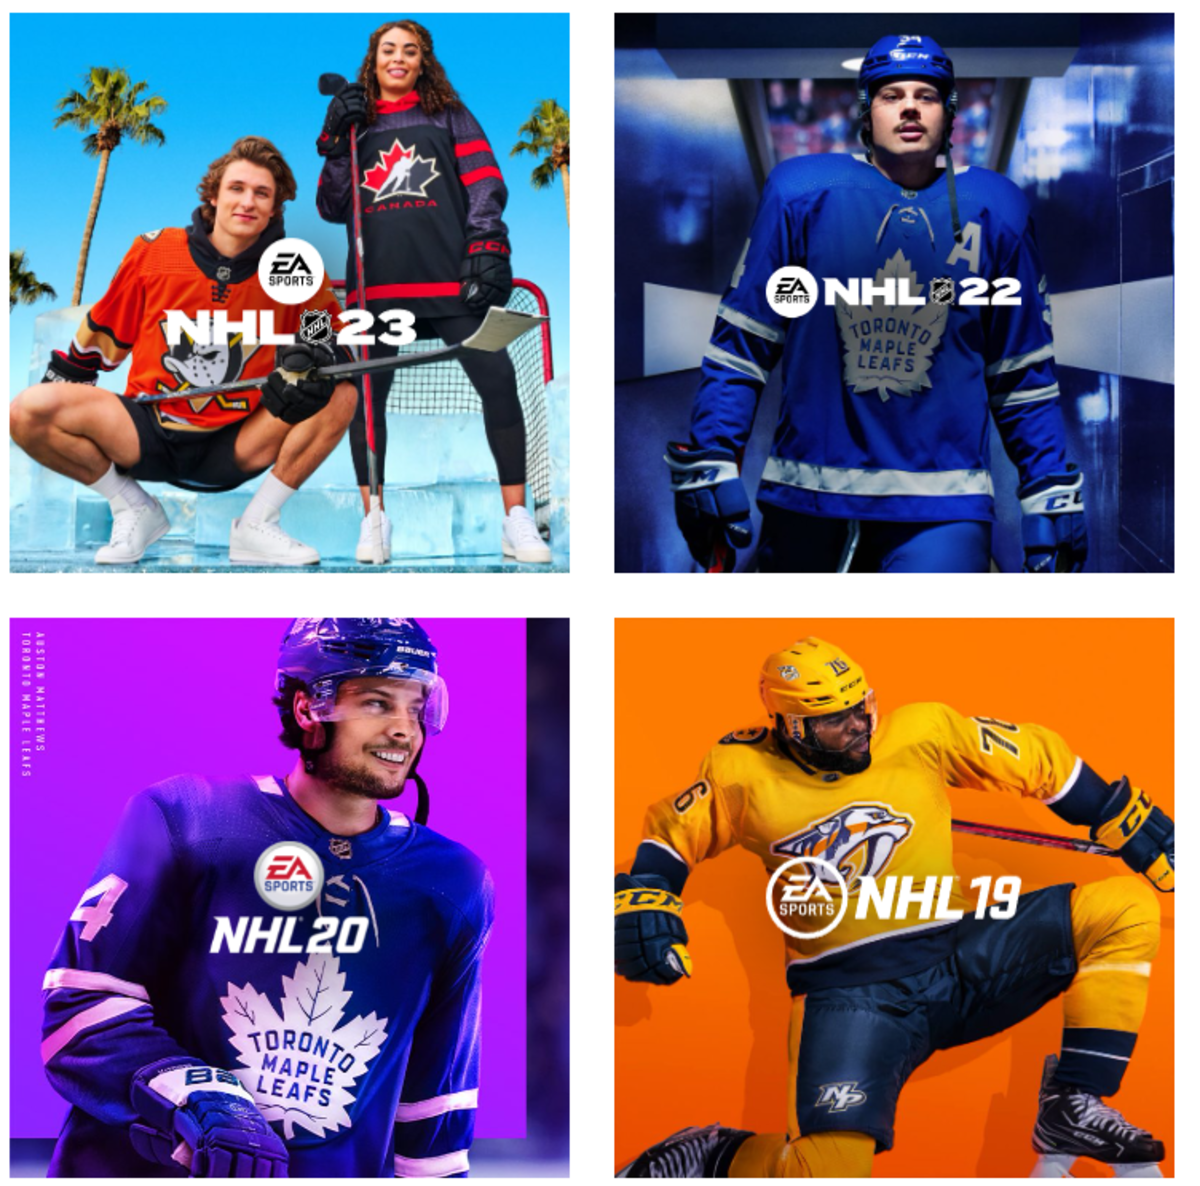 NHL 23 Review - IGN